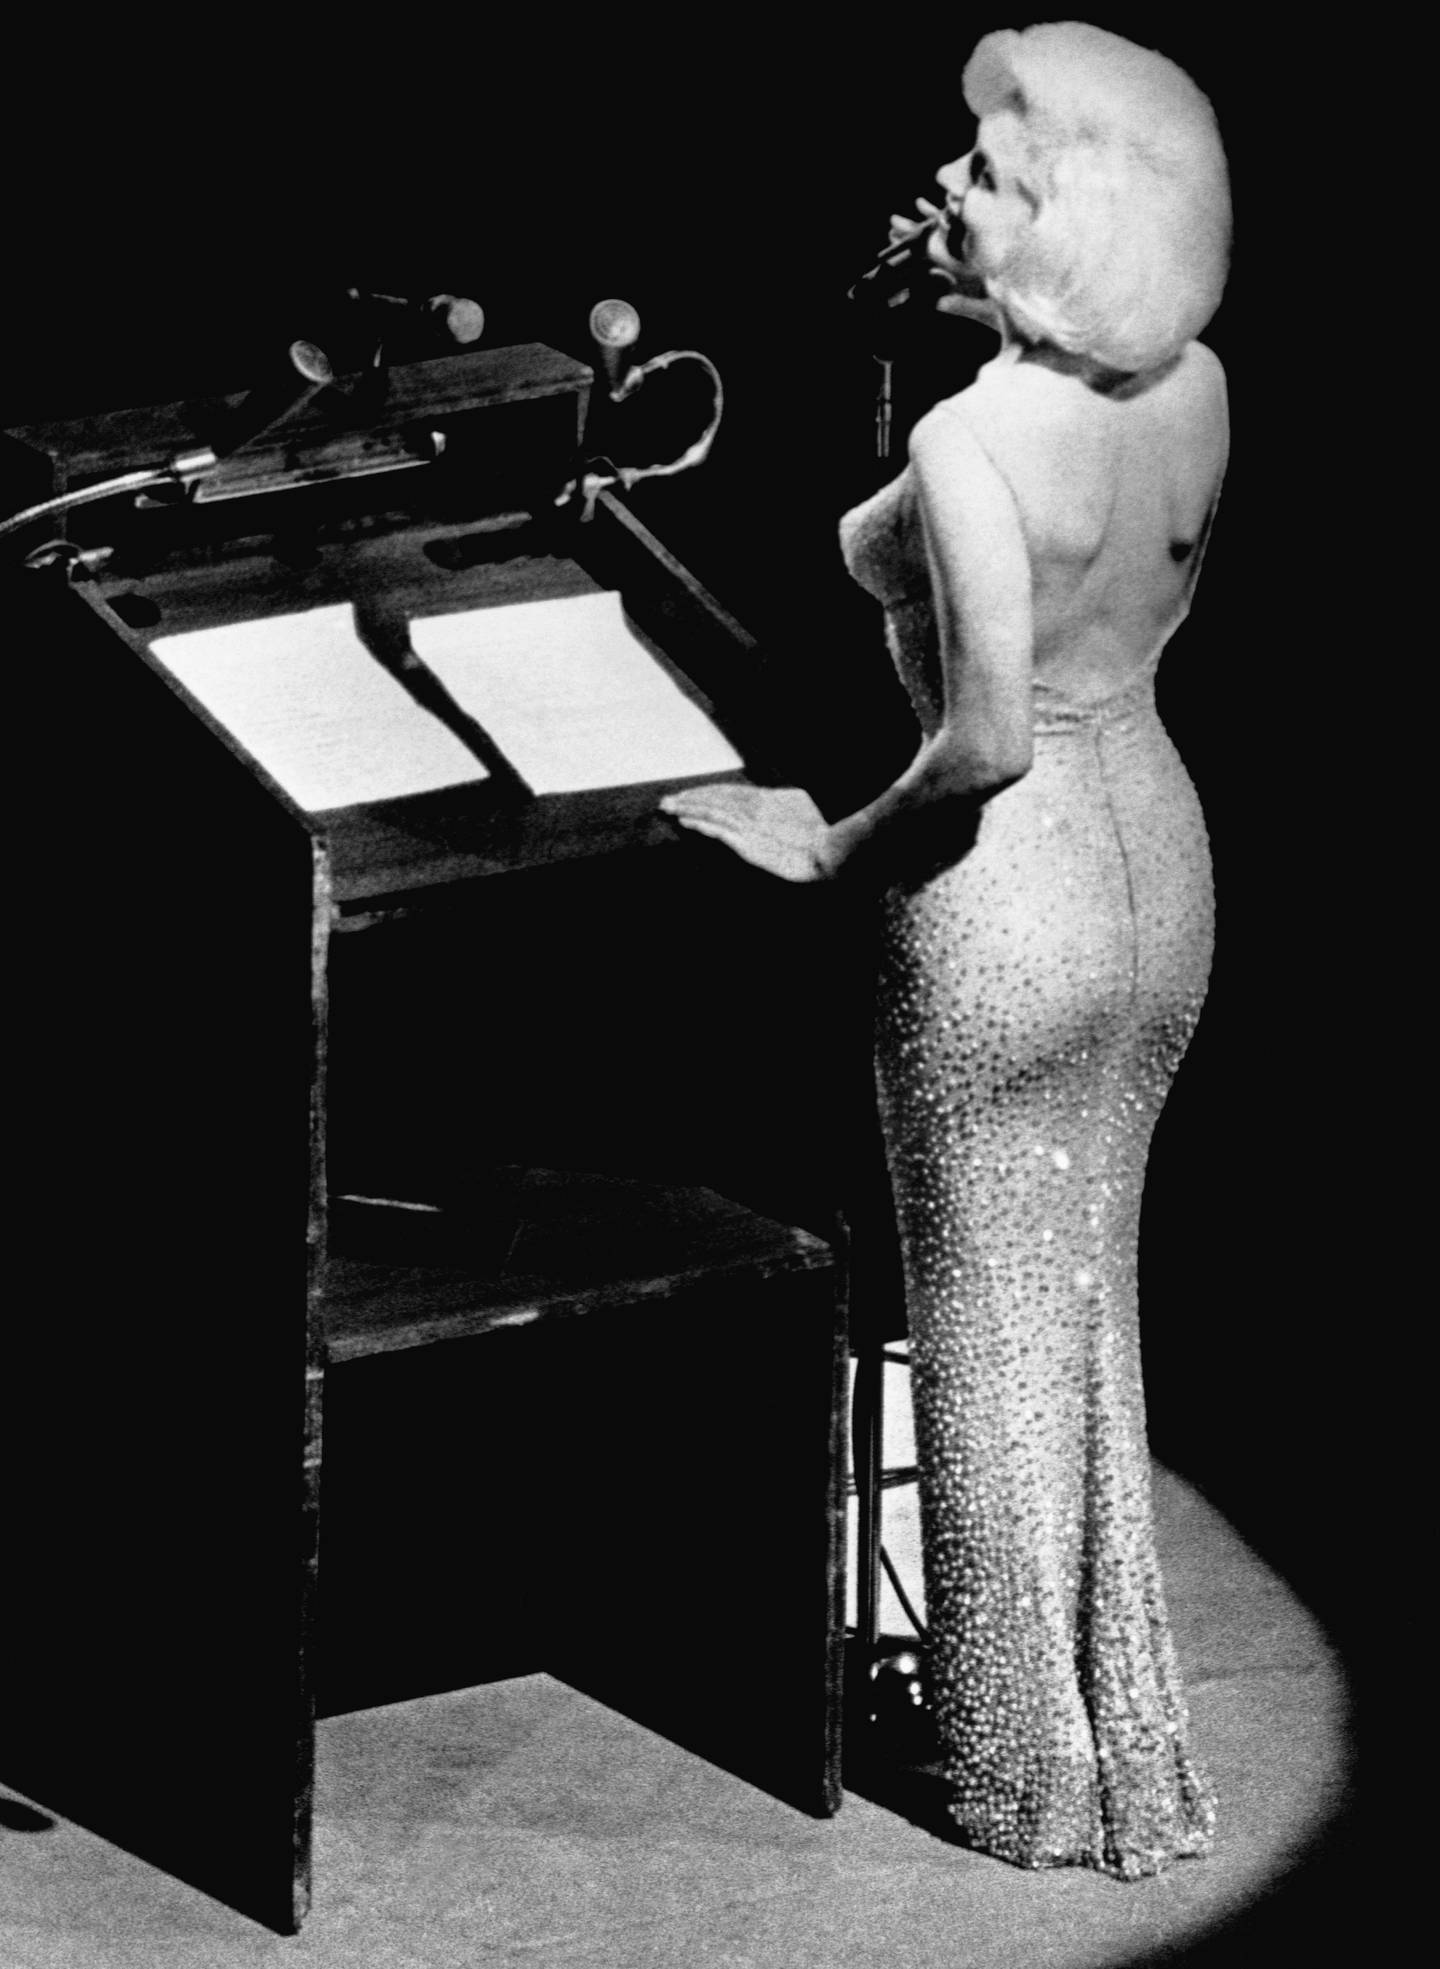 Marilyn Monroe sings 'Happy Birthday' *in 1962, to then US president John F Kennedy, at Madison Square Garden, for his 45th birthday. She is wearing the crystal-covered gown created by Bob Mackie. Photo: Bettmann Archive